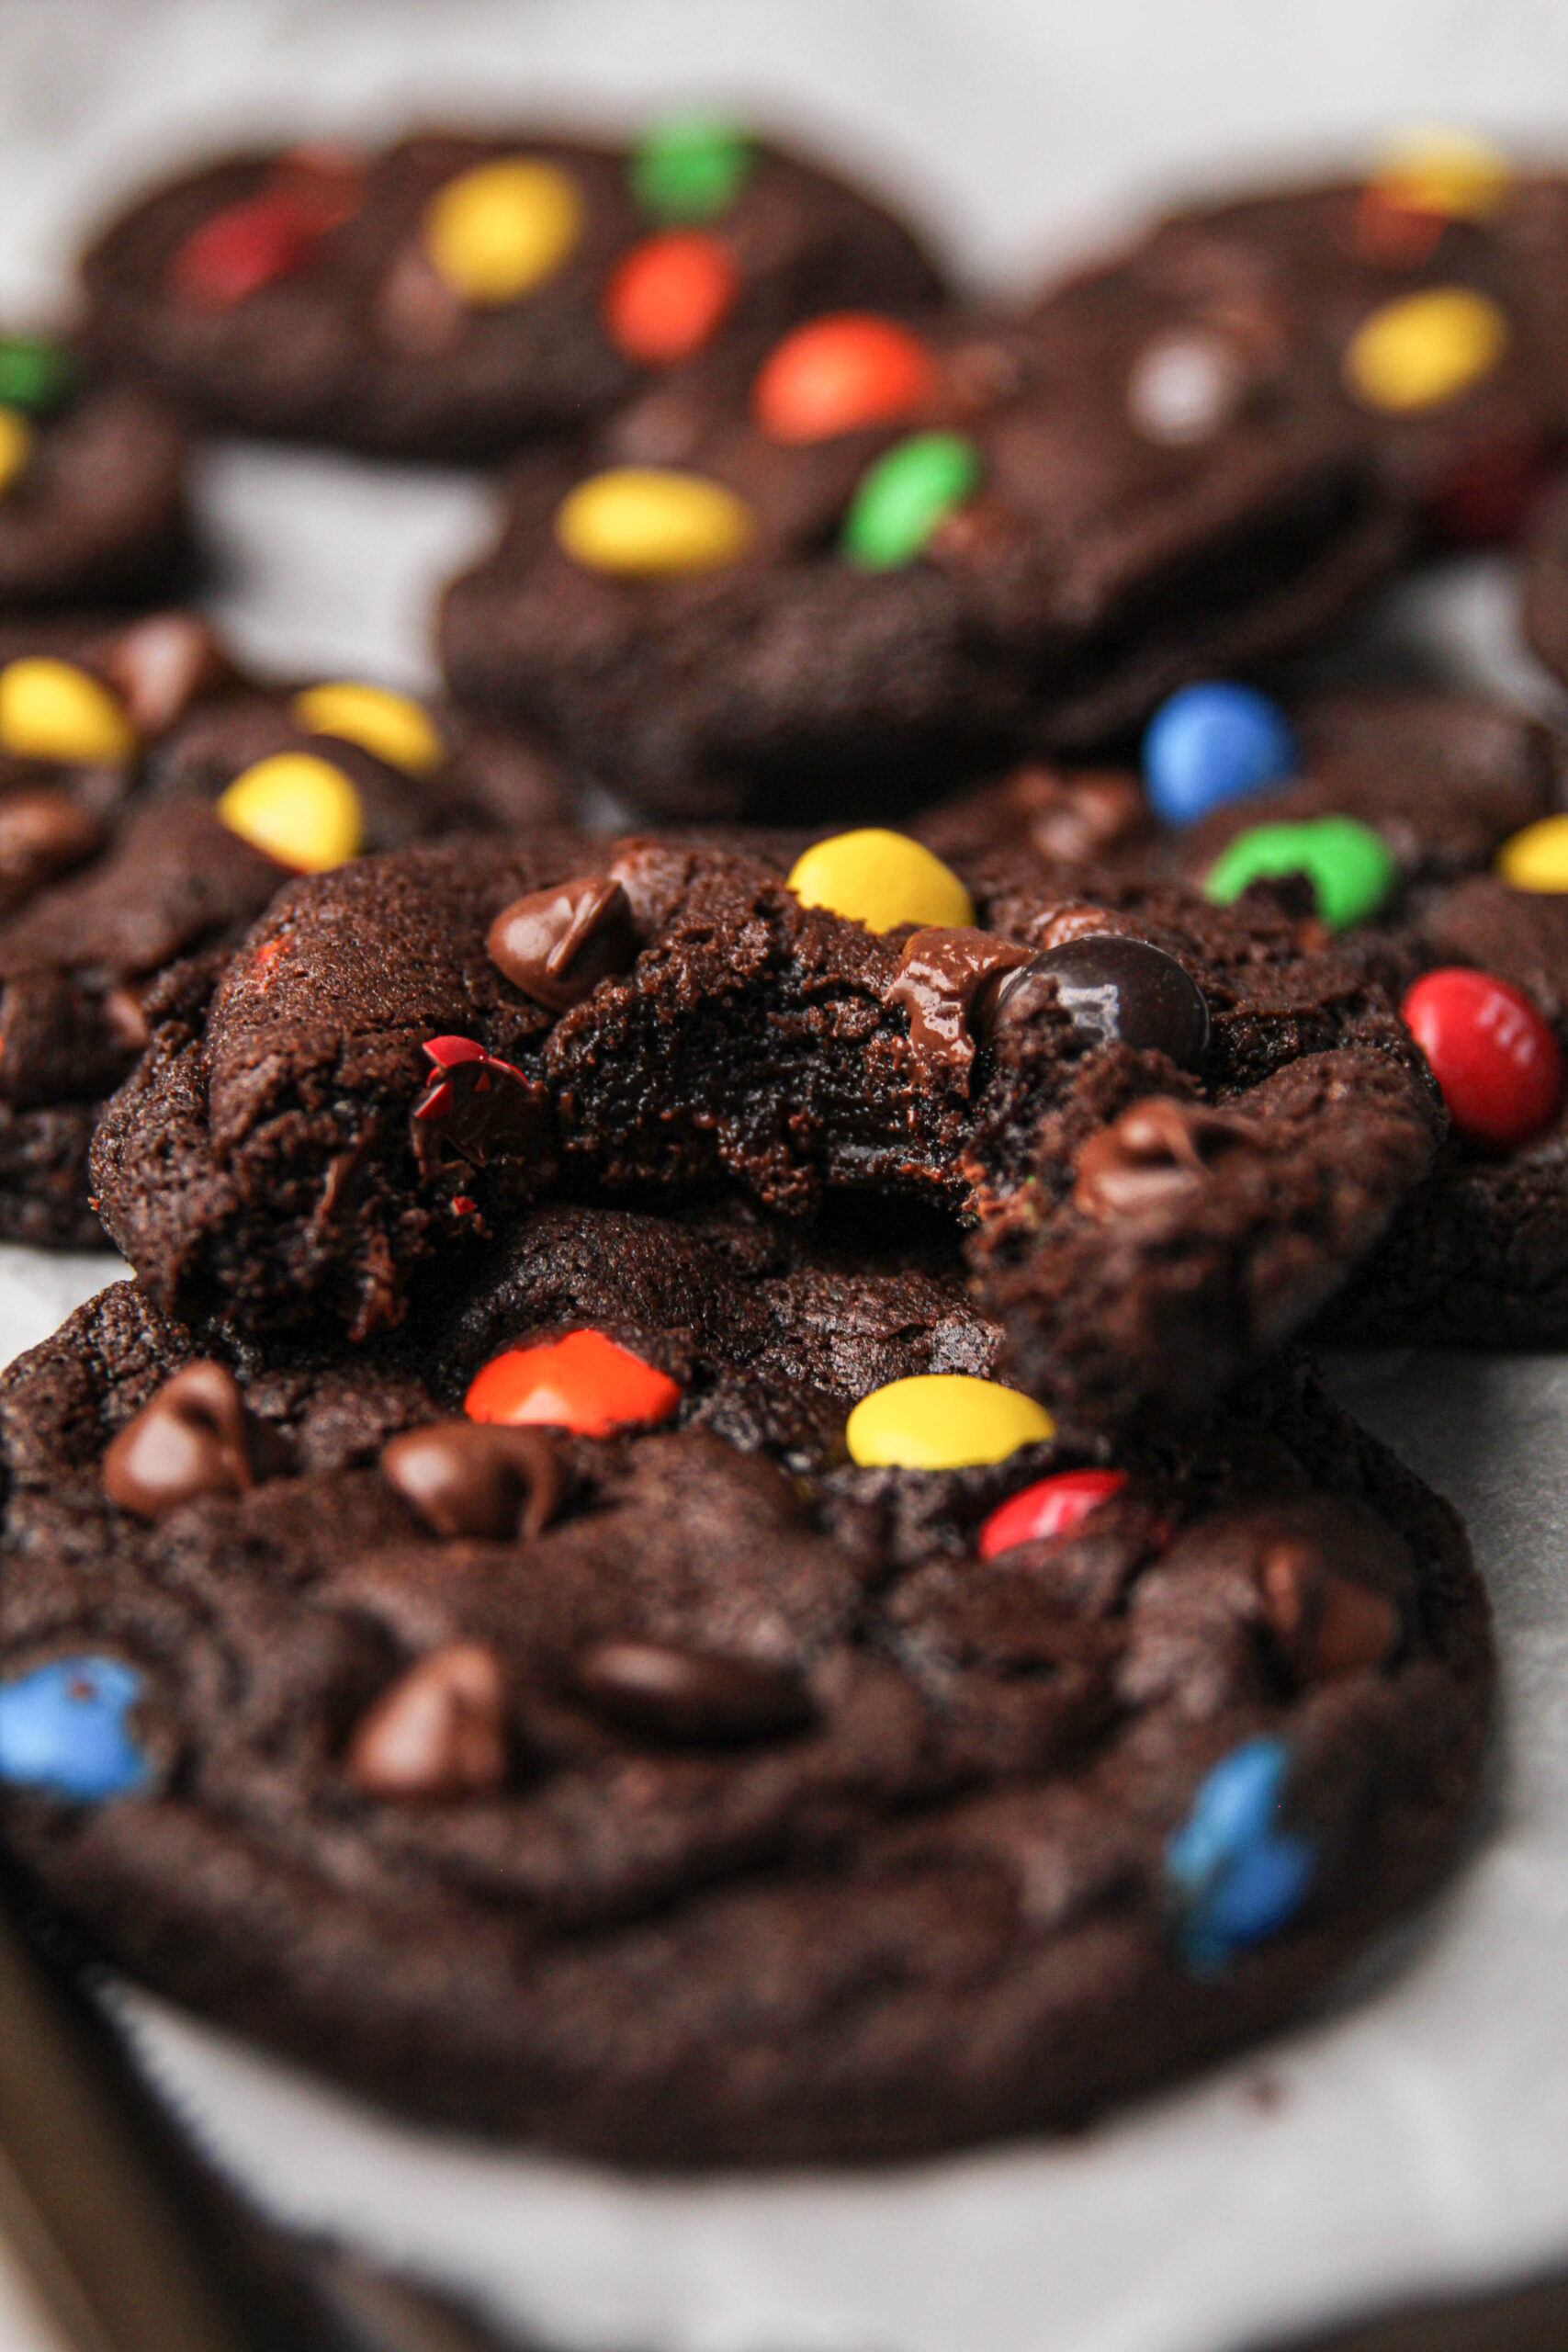 M&M'S USA - We know, you never thought M&M'S Fudge Brownie